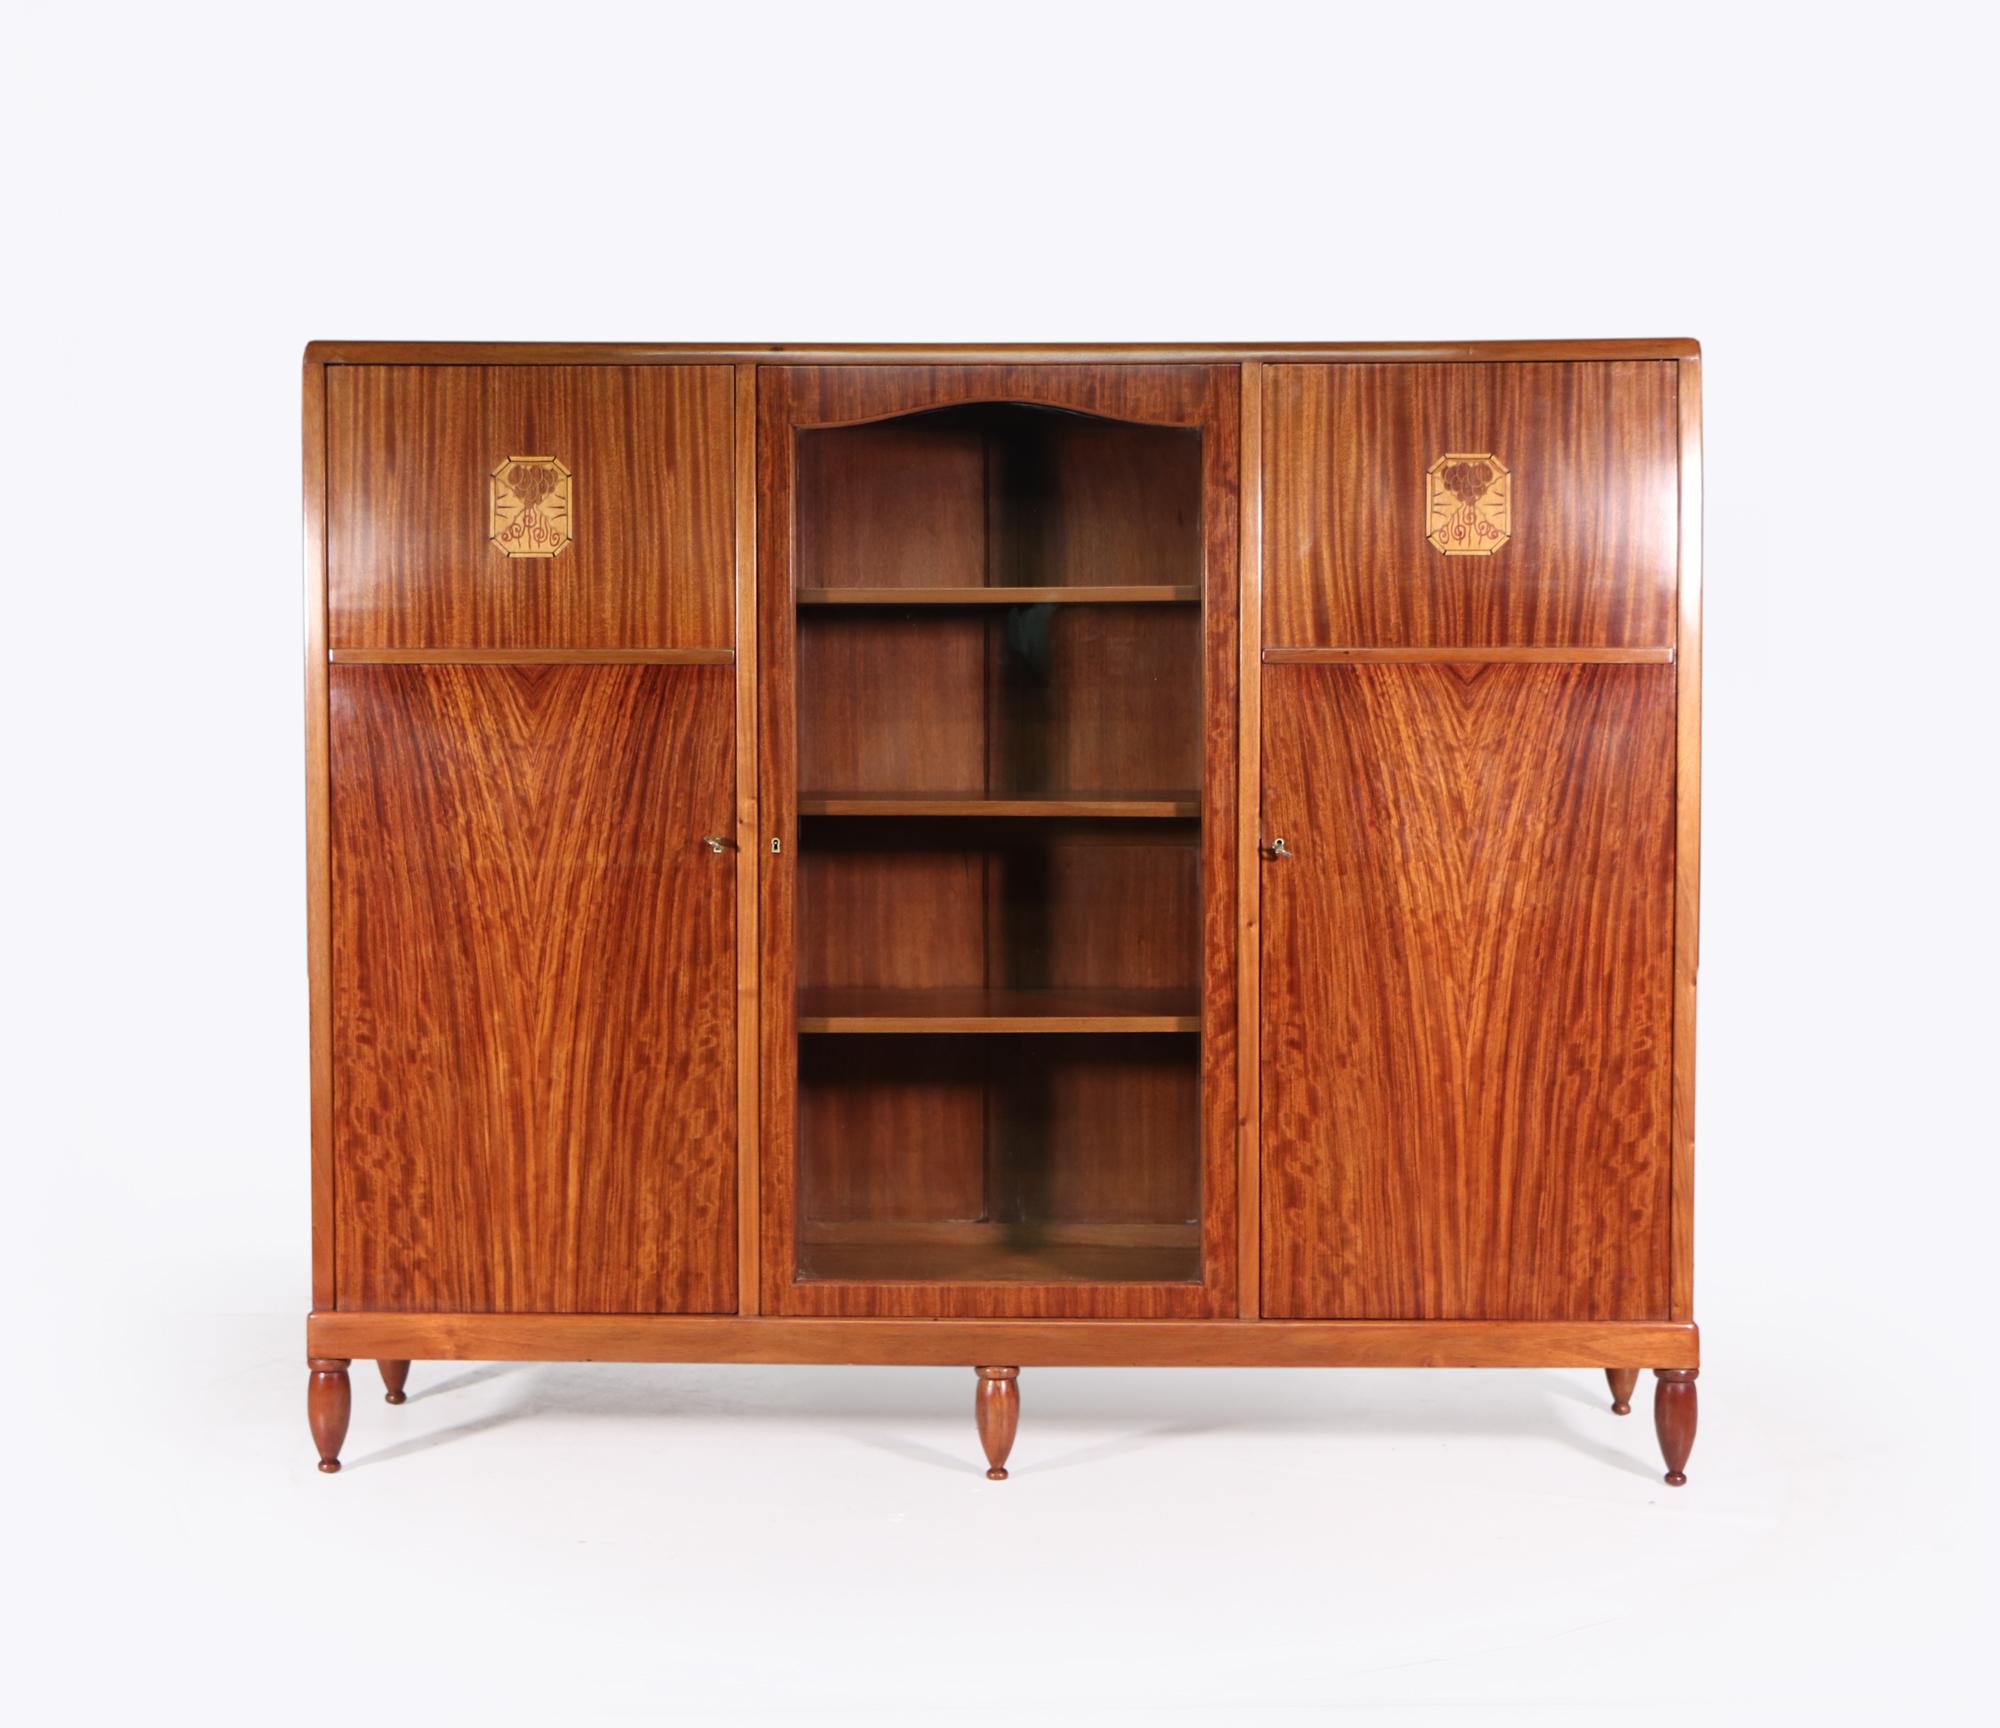 Early 20th Century French Art Deco Library Bookcase by Maurice Dufrene